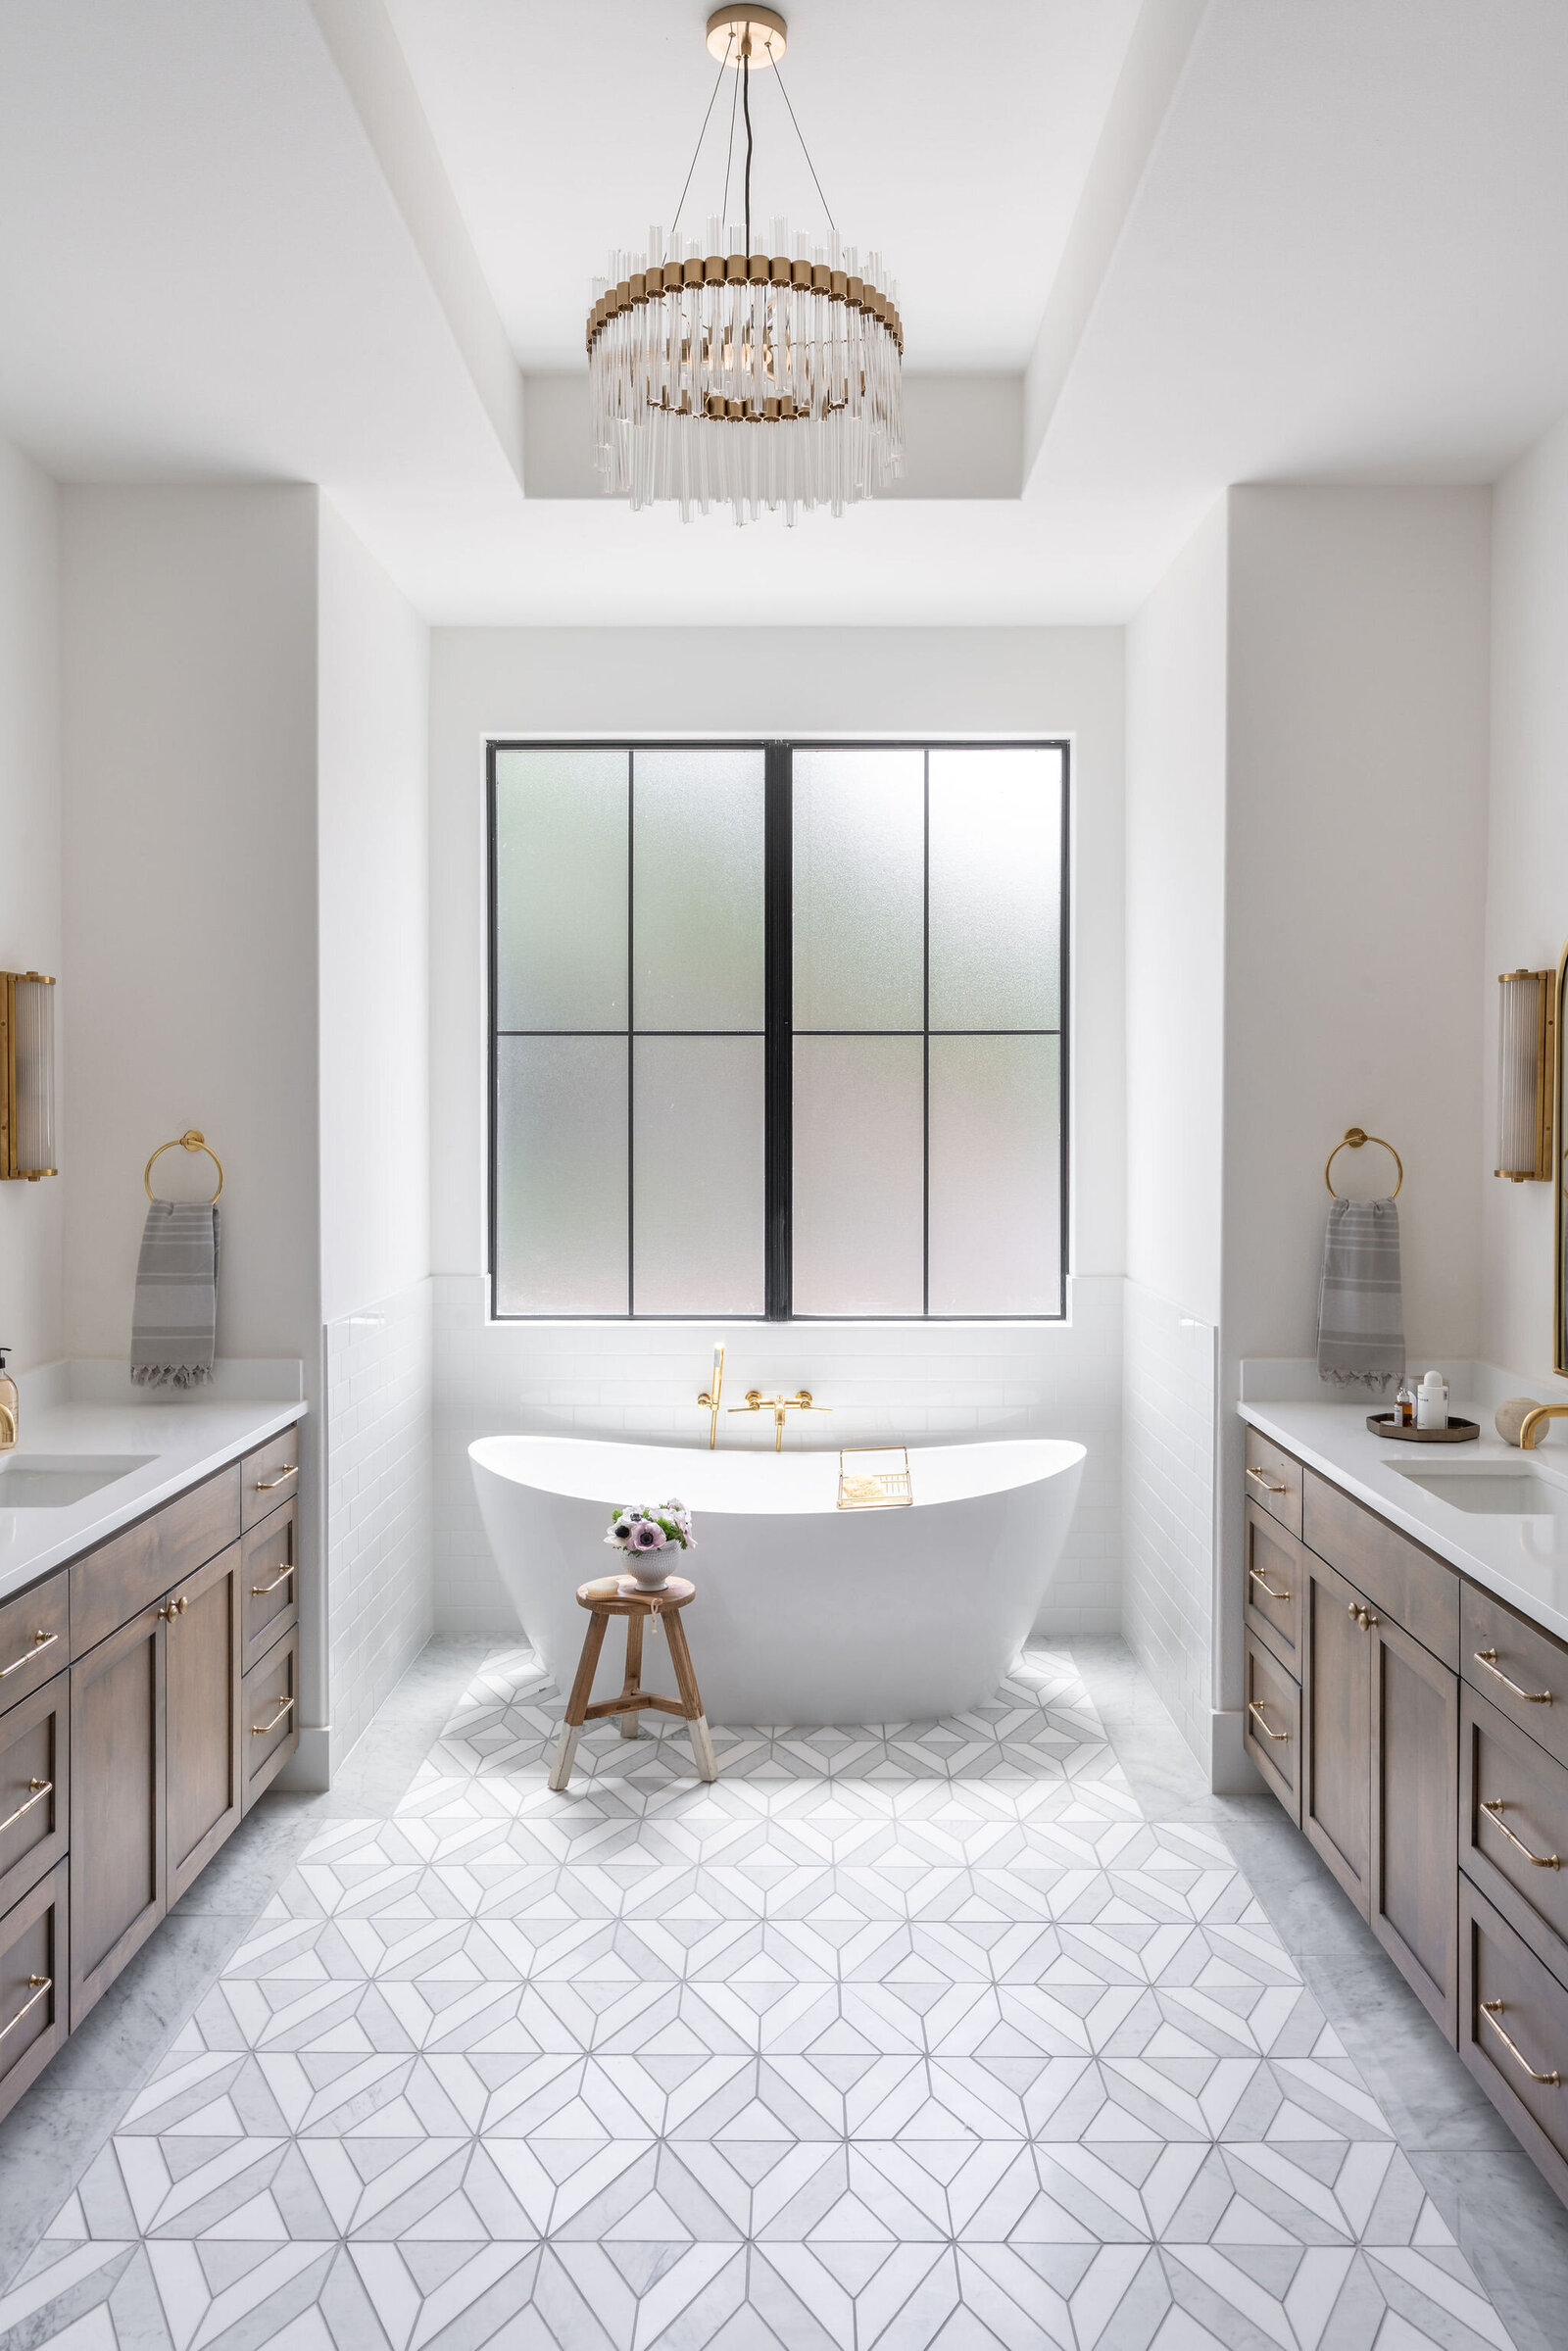 NuelaDesign_White Freestanding Tub with White and Gray Marble Floor